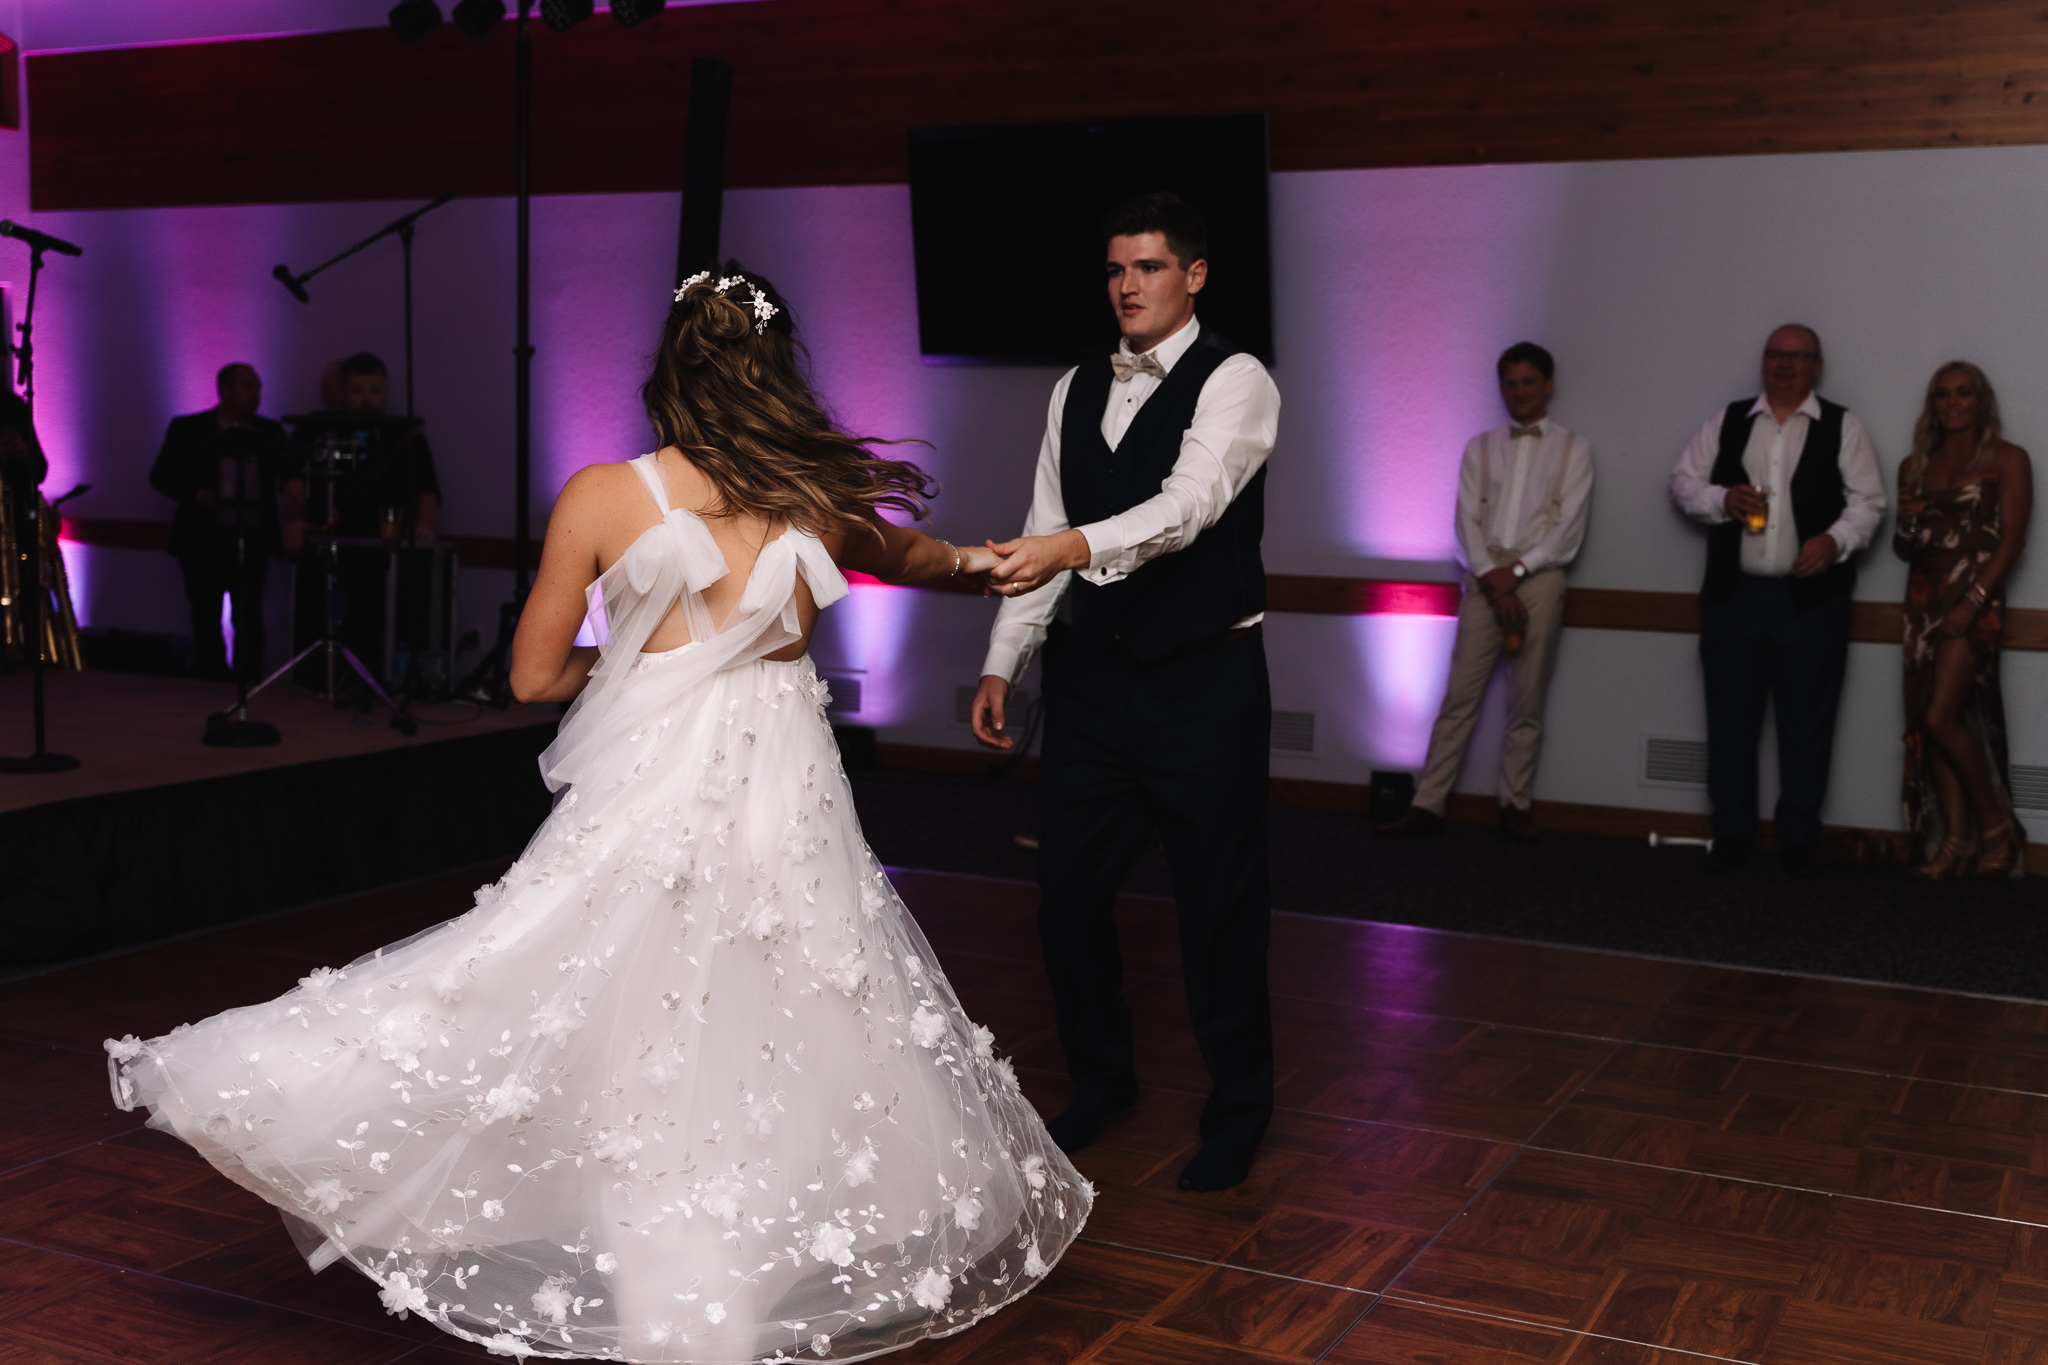 A groom dancing with his bride as her dress twirls and spins around. Purple and pink lights surround the dance floor